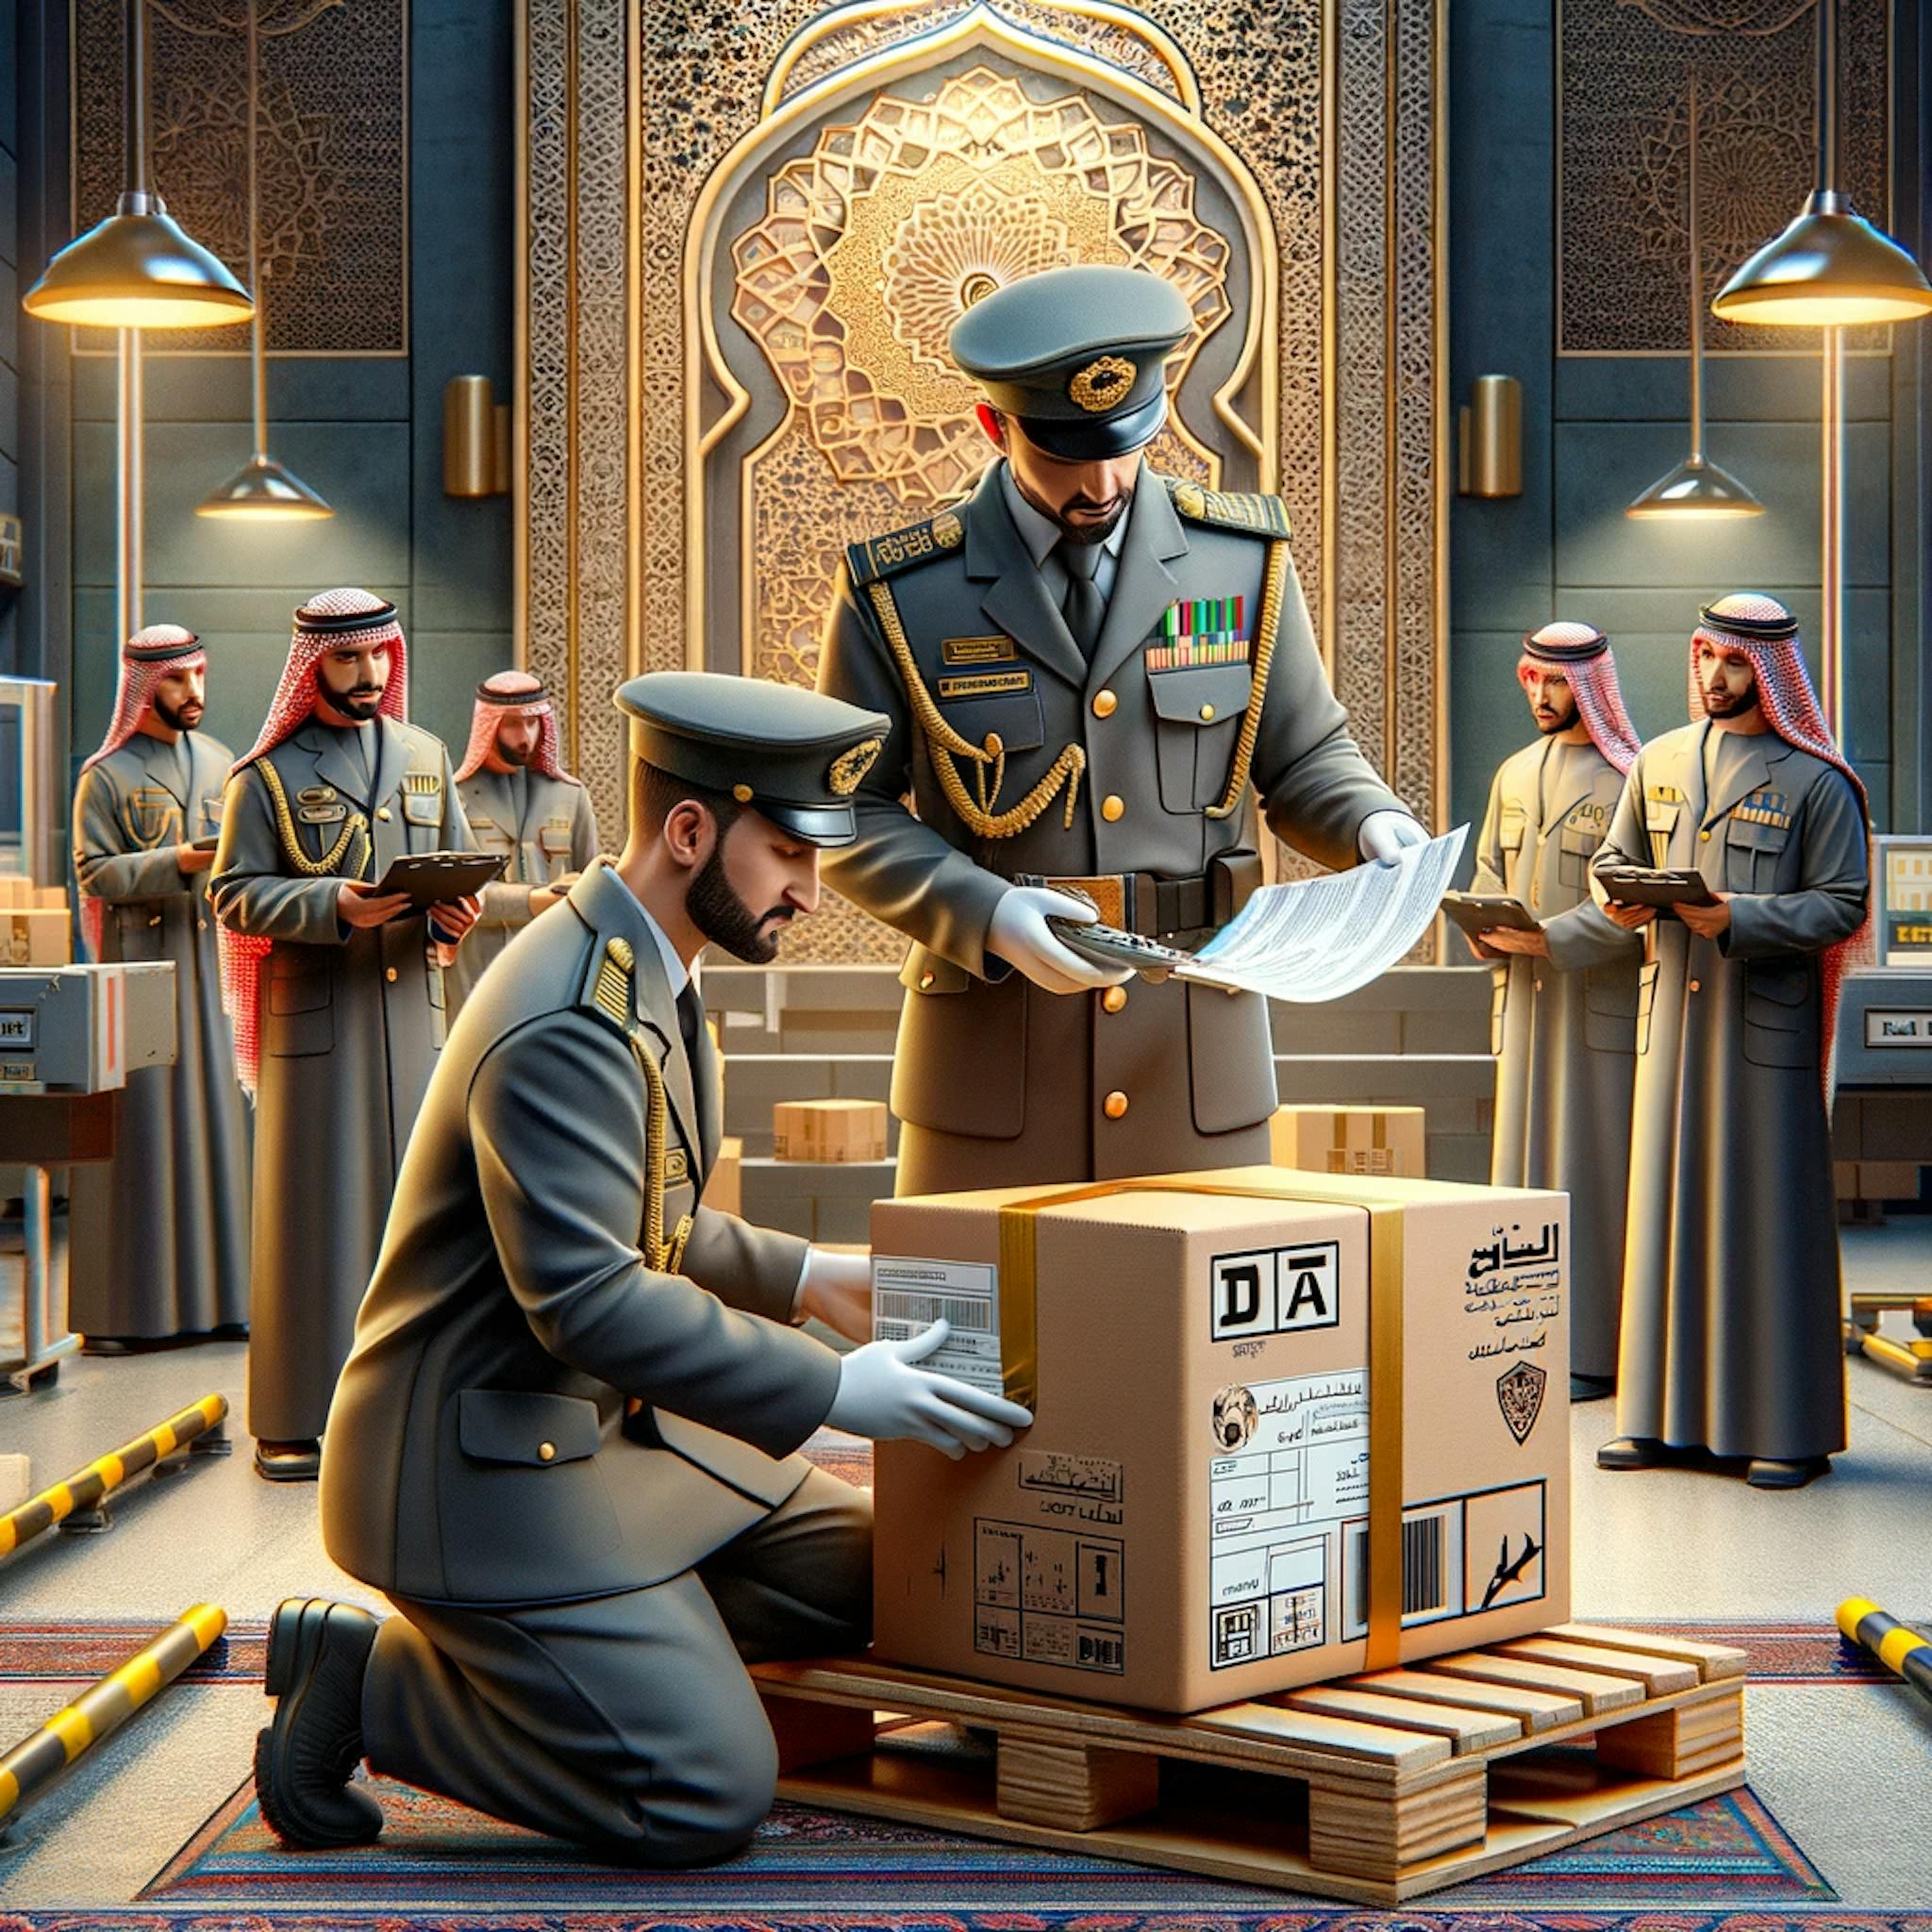 a package shipped to the UAE being inspected by customs officers